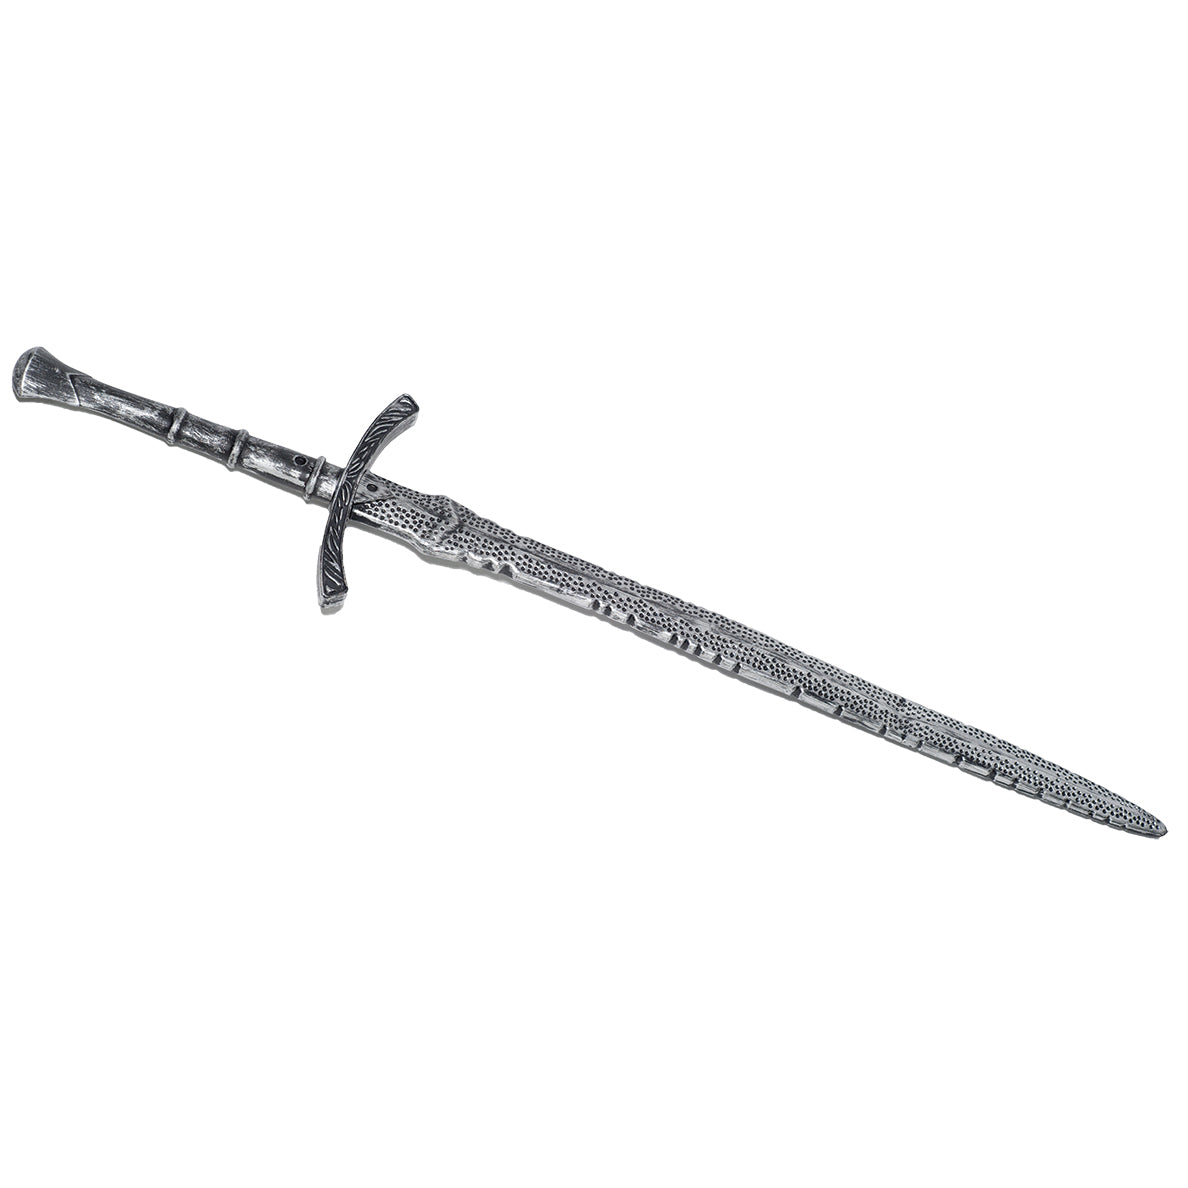 Reaper Sword - Adult or Child